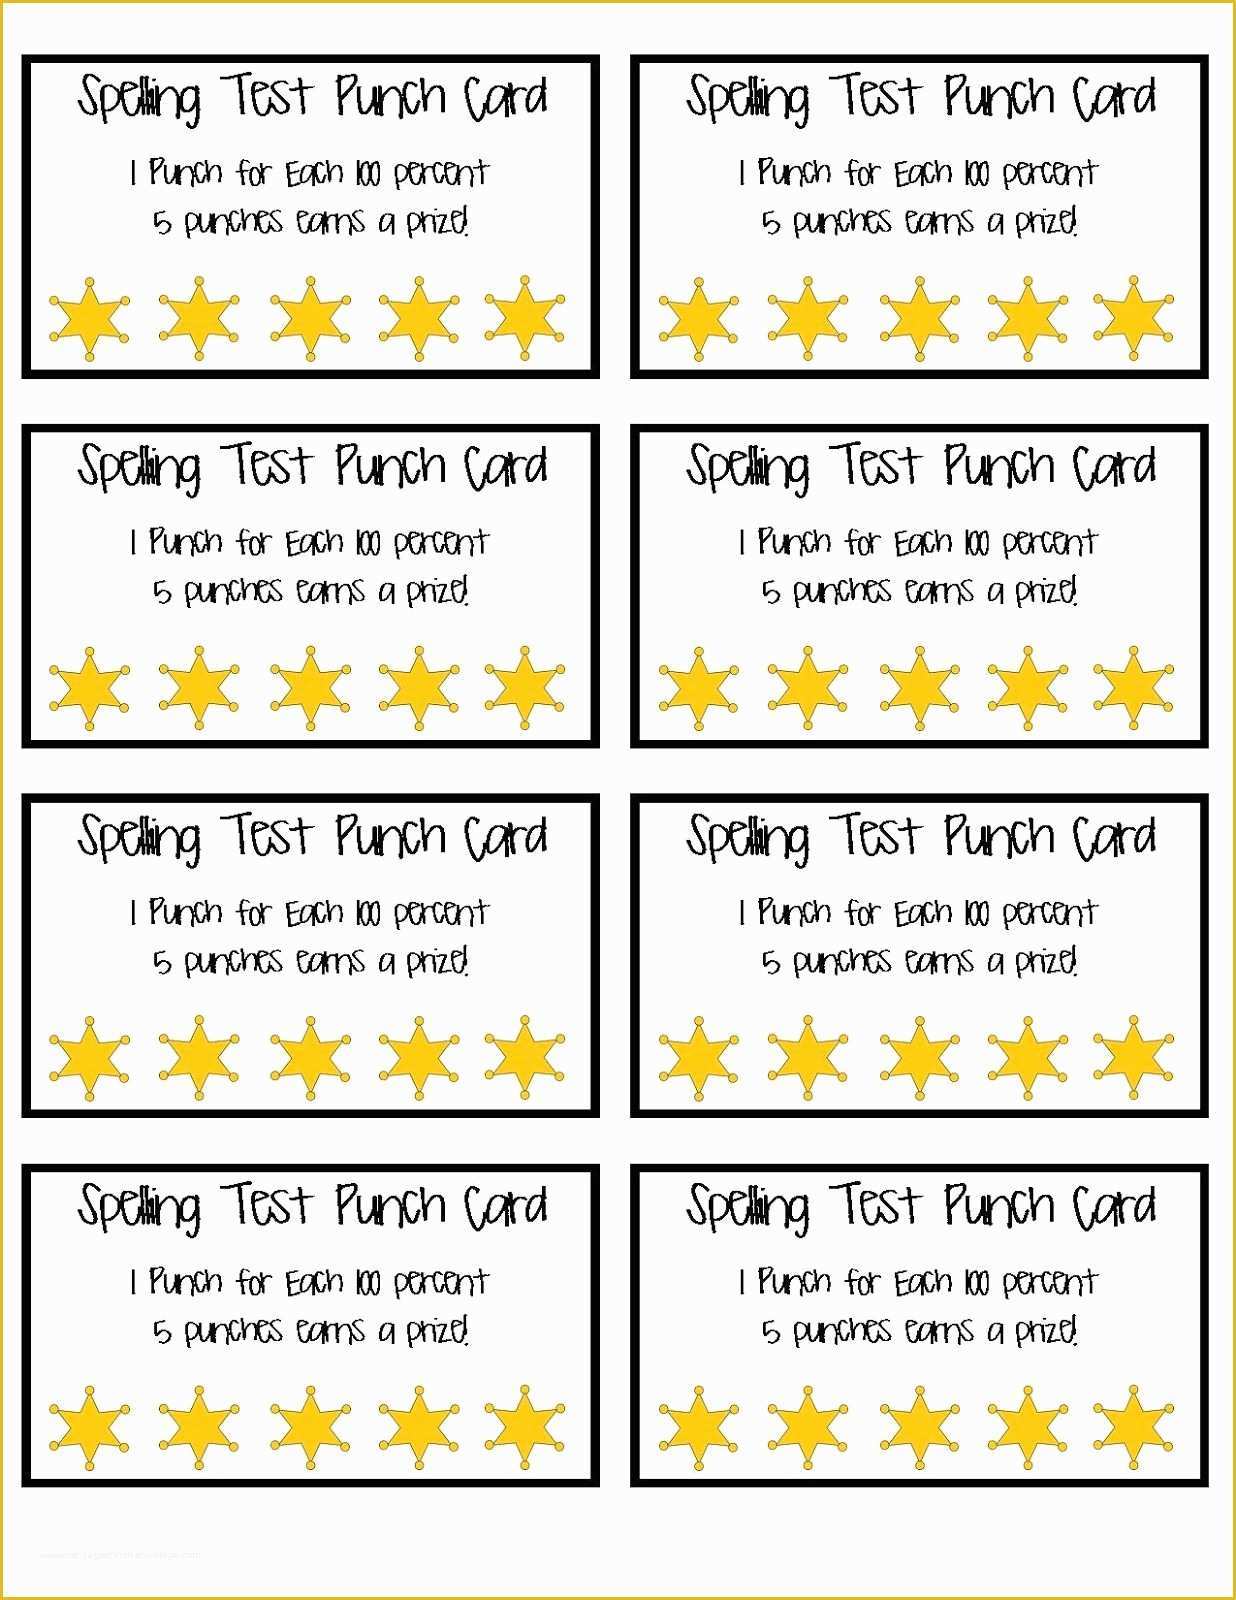 free-printable-punch-card-template-of-spelling-test-punch-cards-part-of